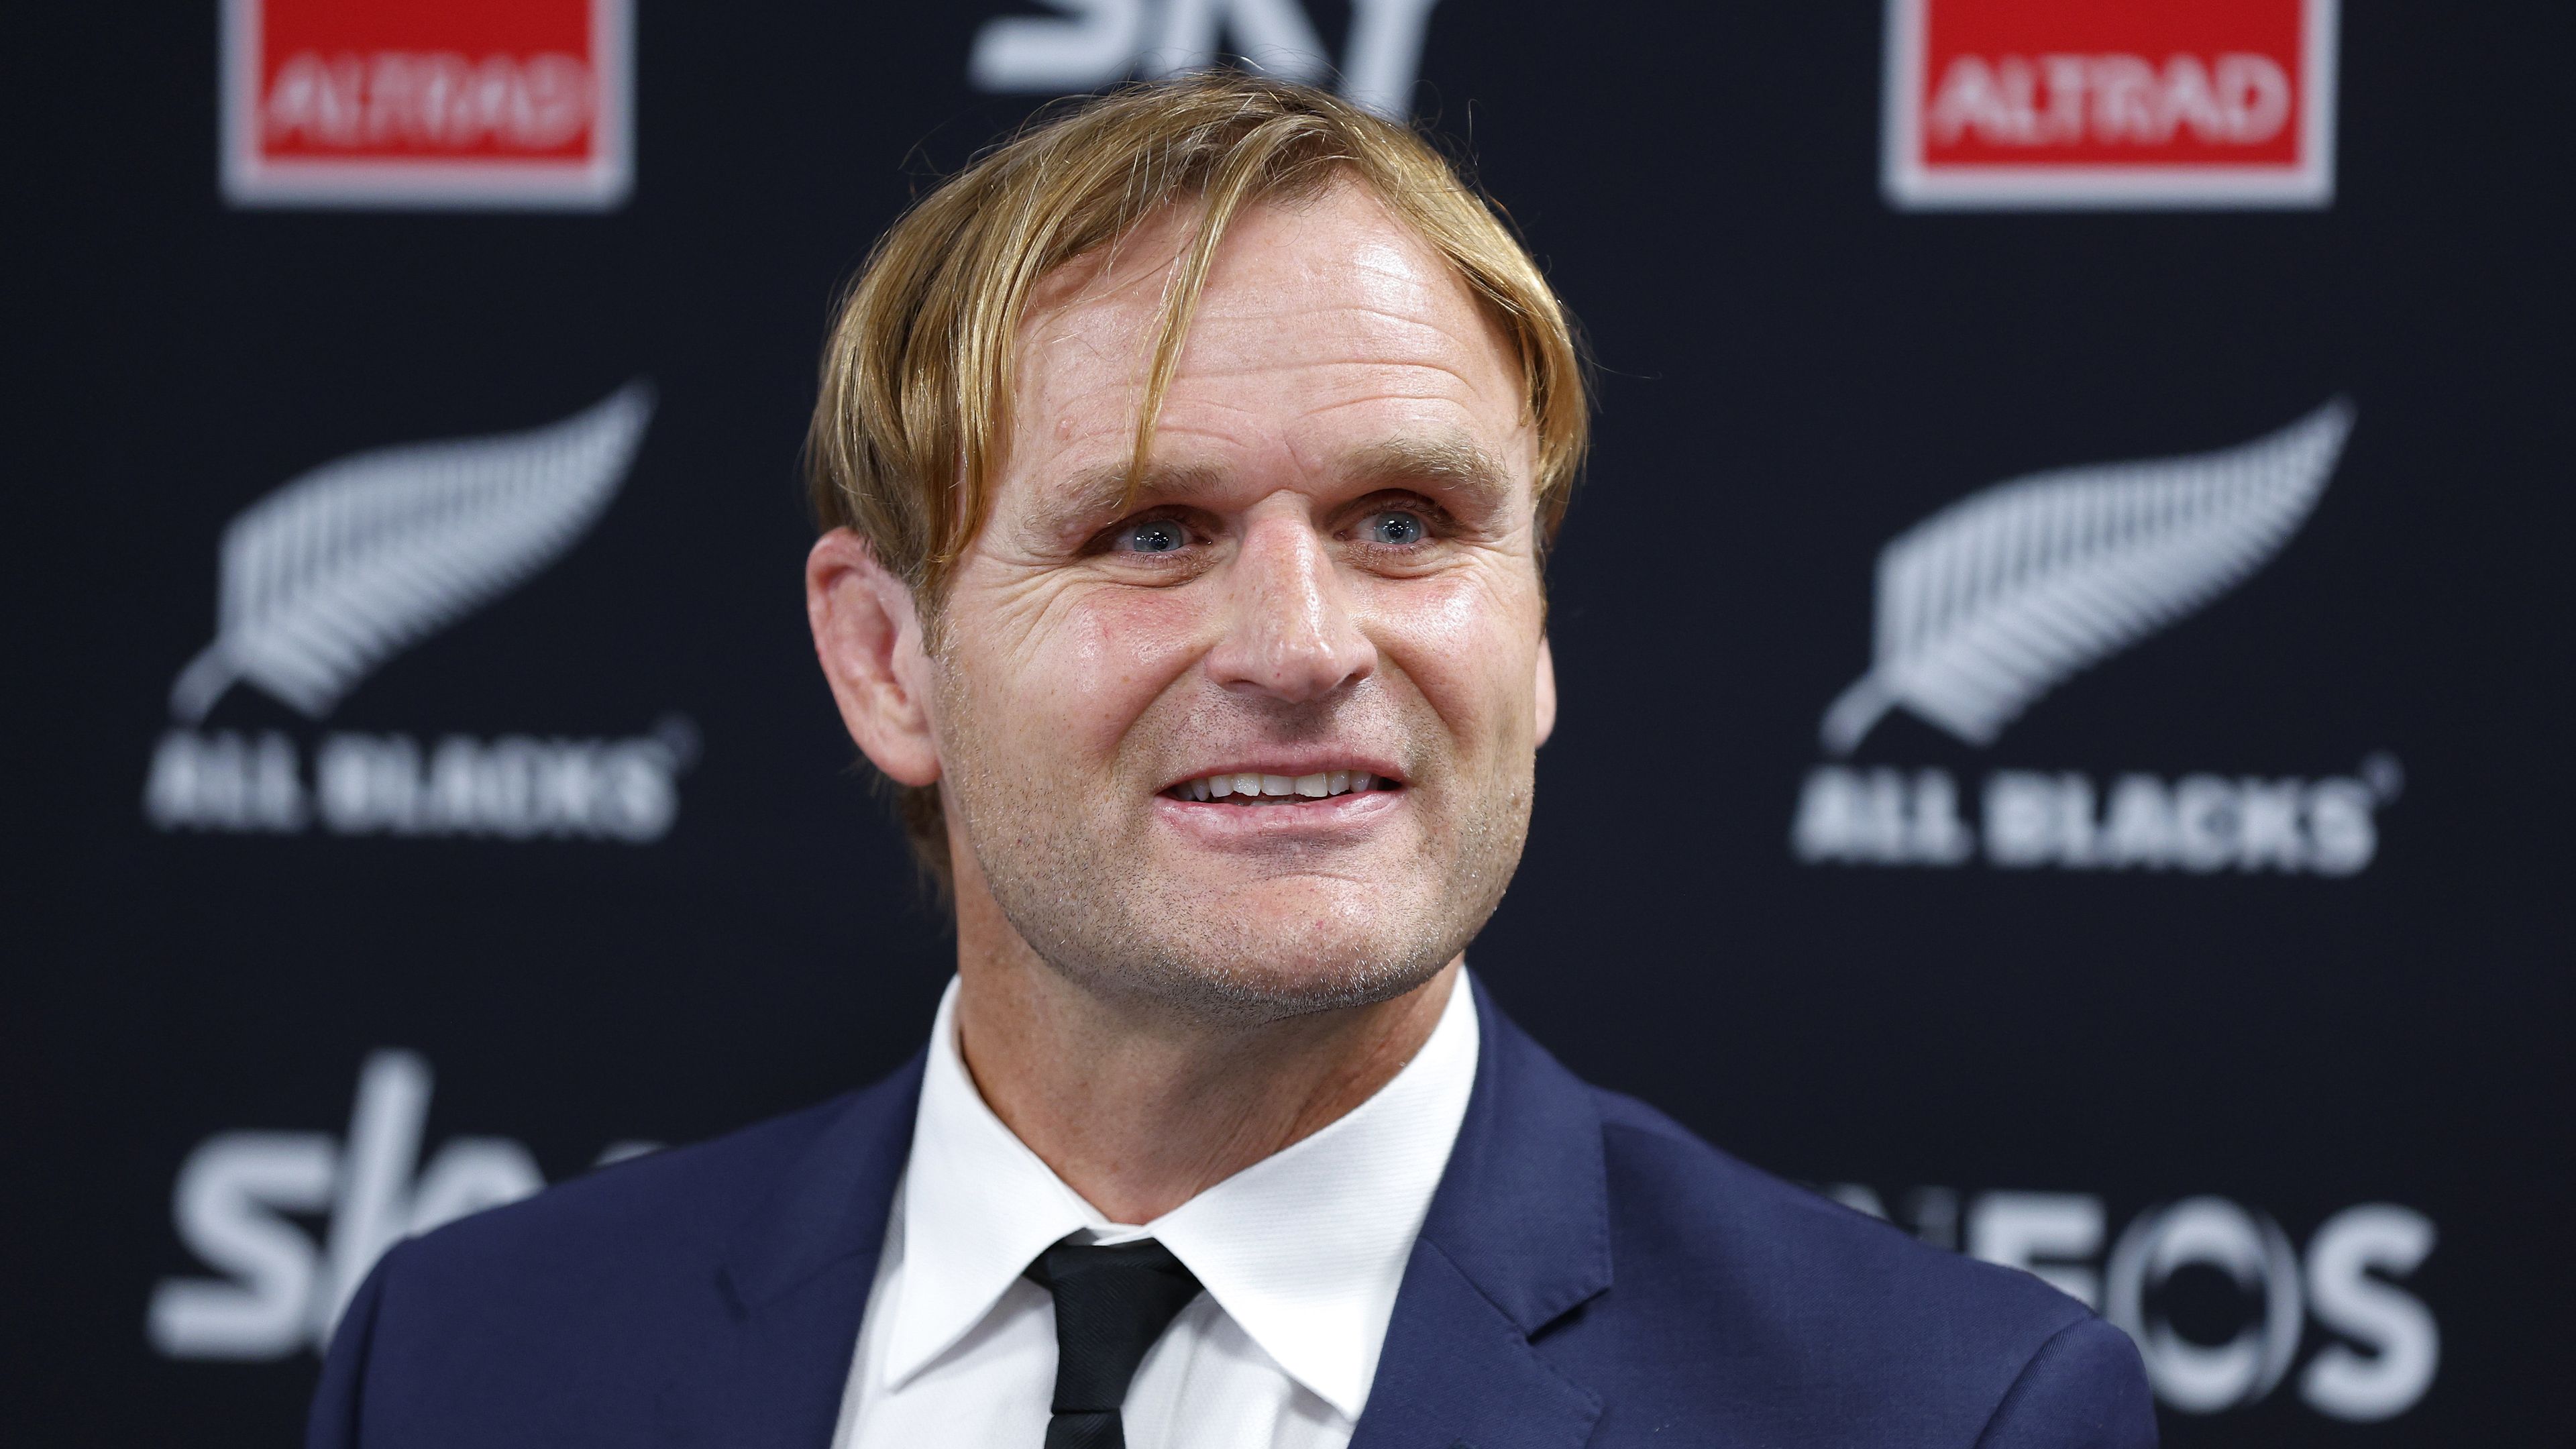 New Zealand Rugby announced Scott Robertson as the new All Blacks coach from 2024.